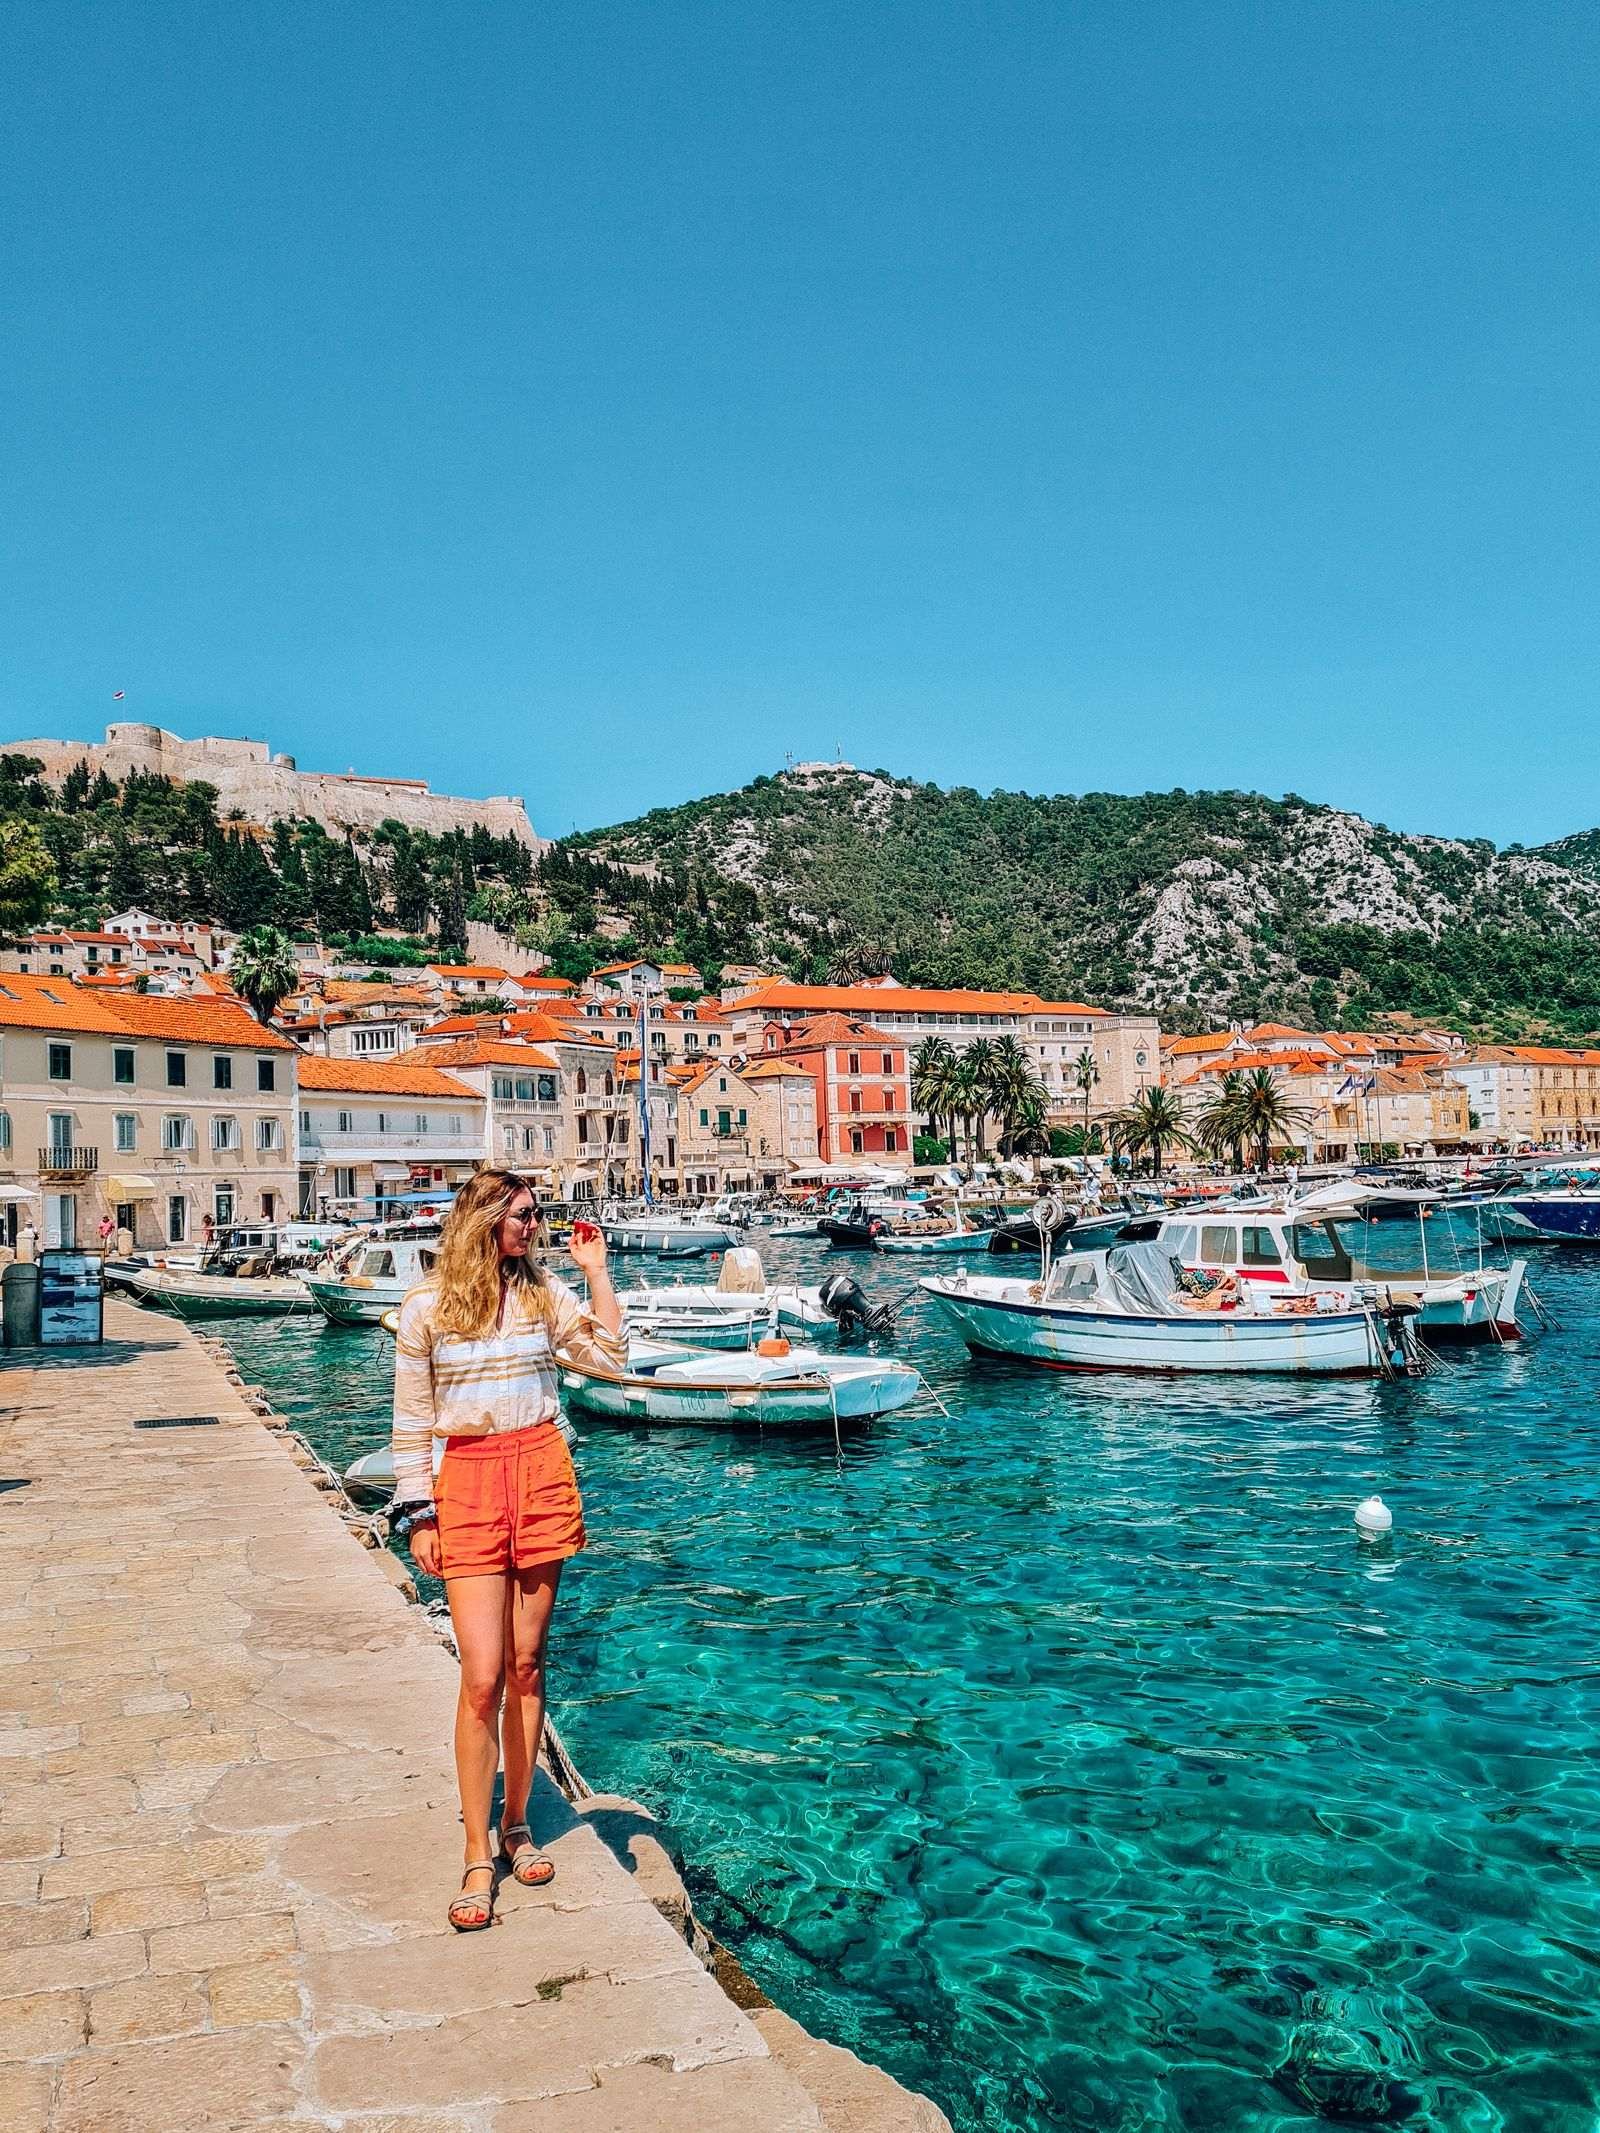 A girl in orange shorts standing on the edge of a marina with blue water and many old stone buildings in the distance